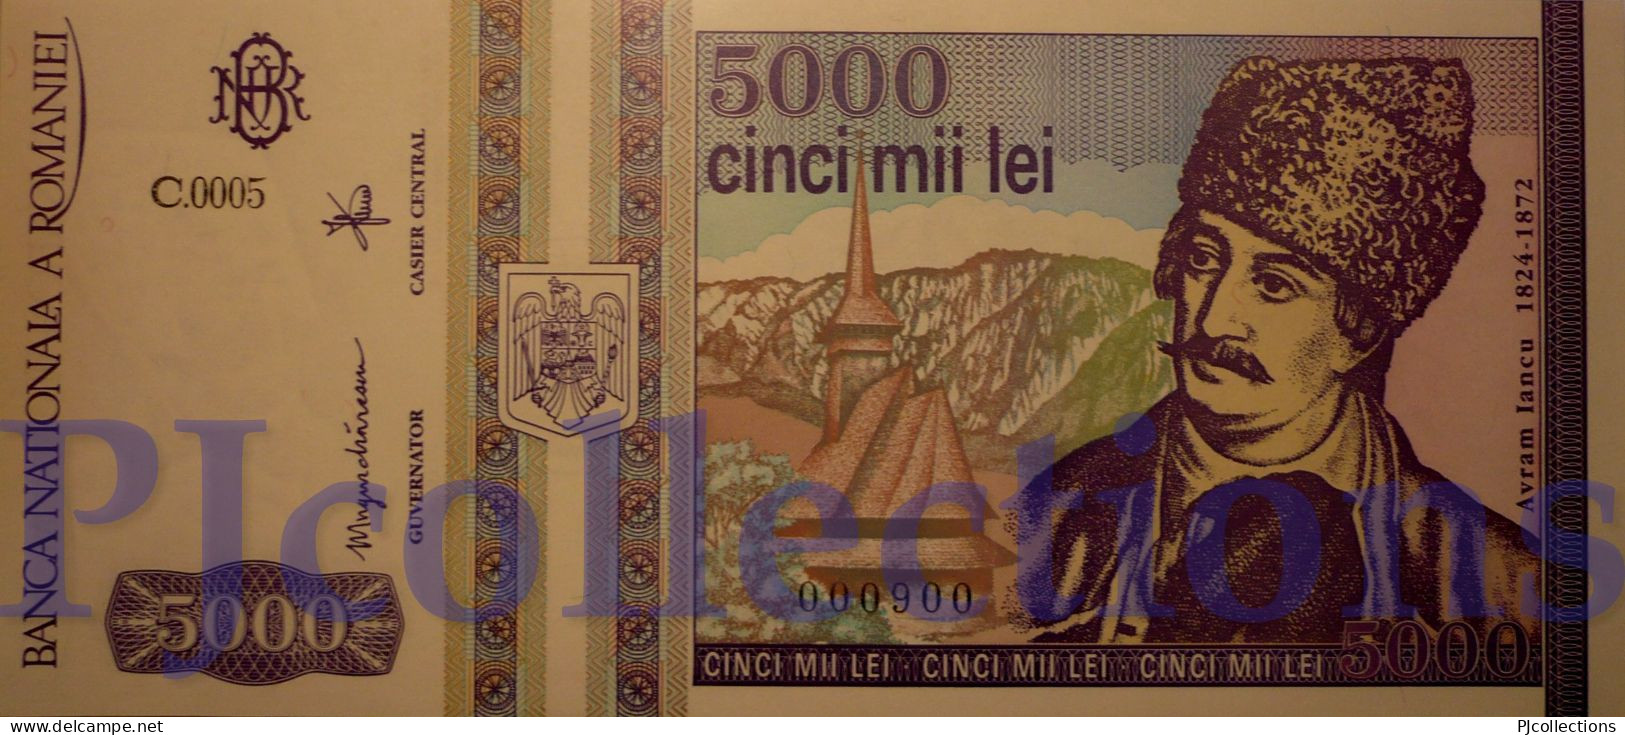 ROMANIA 5000 LEI 1993 PICK 104a UNC LOW & GOOD SERIAL NUMBER "000900" - Roumanie